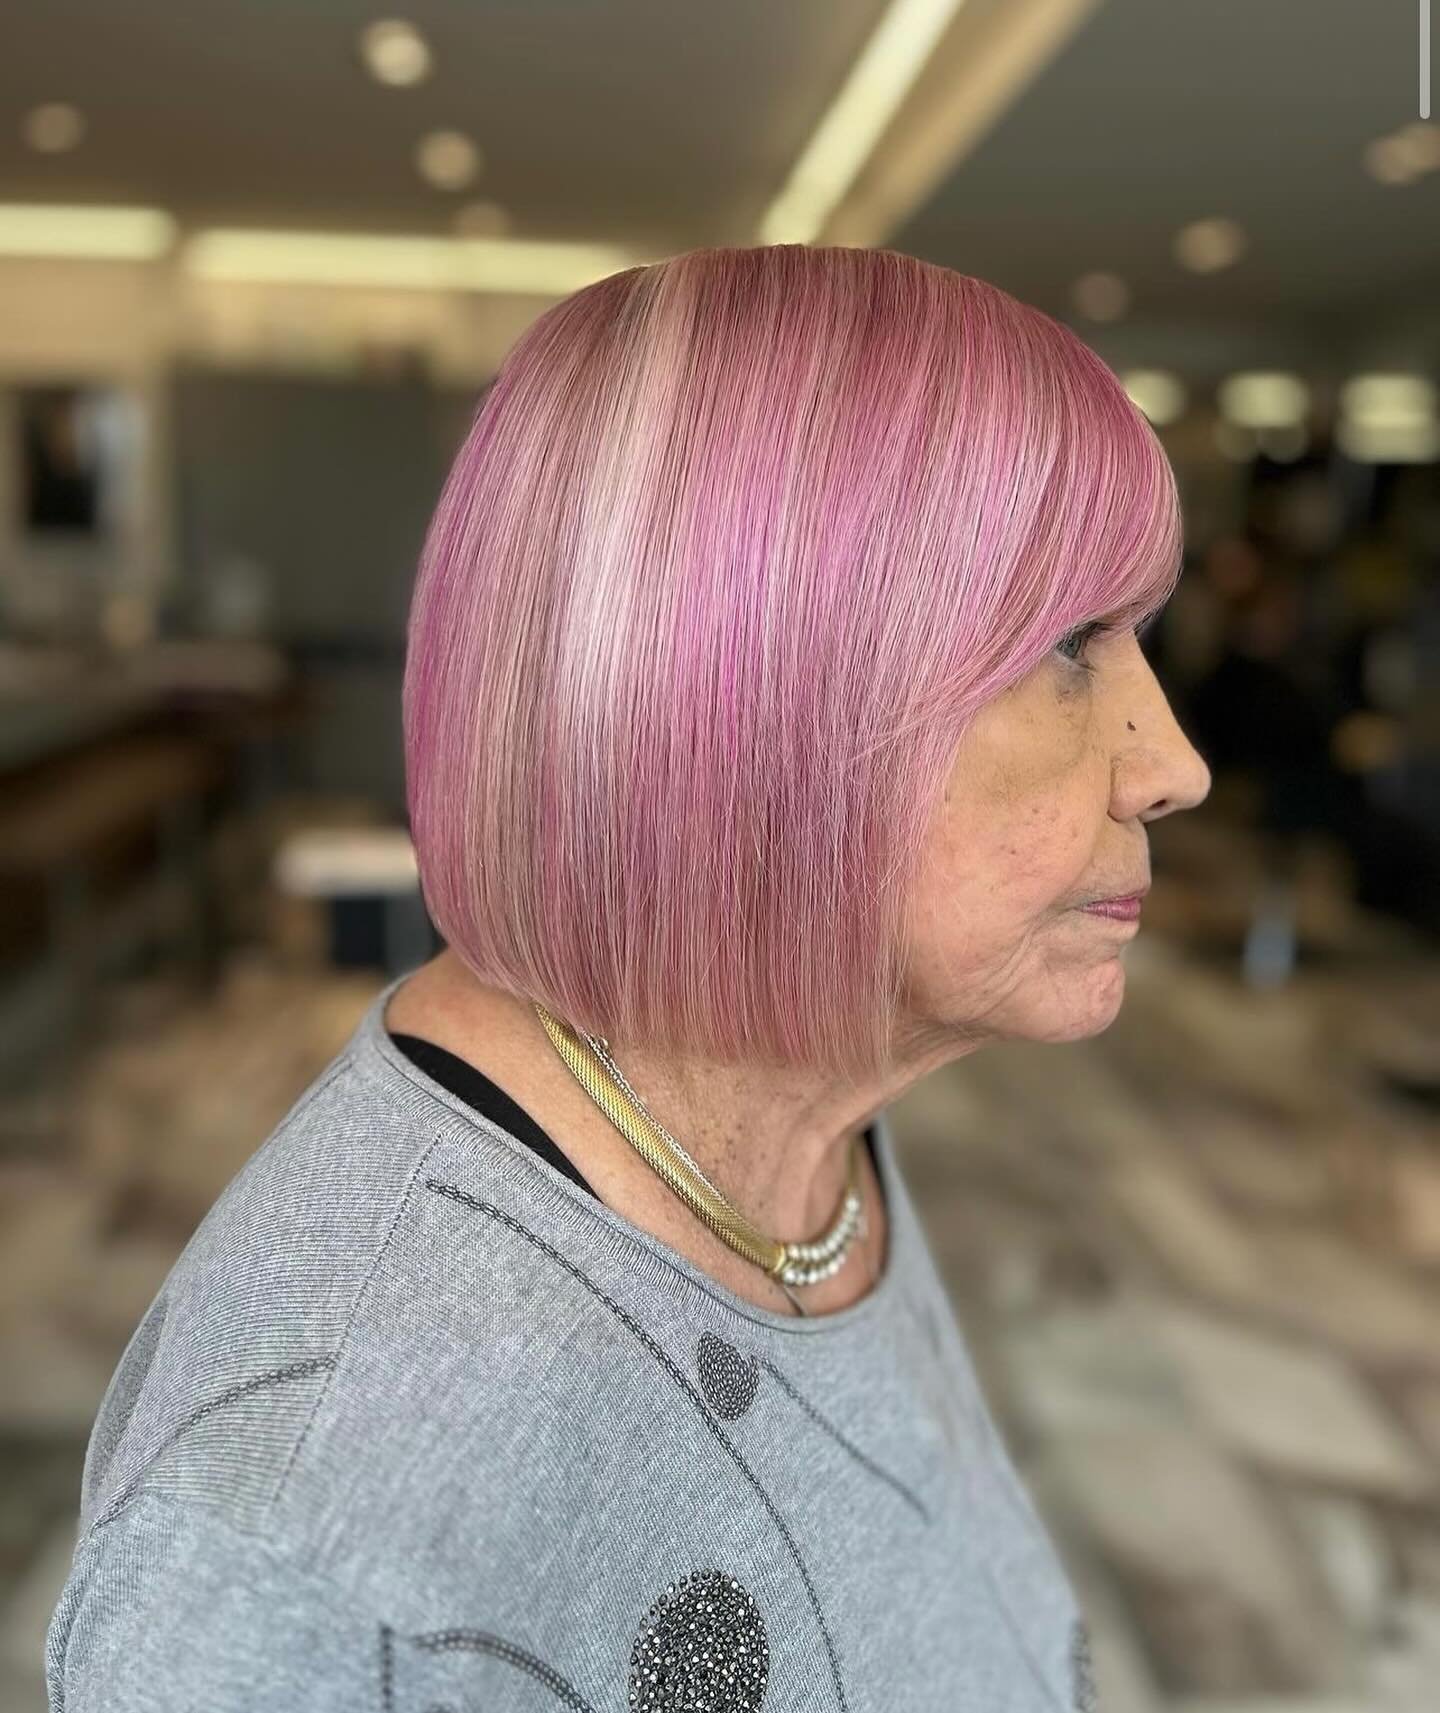 Cherry Blossom 🌸🍒
Hair by @hairby.kayywaters 
.
.
.
@goldwellca #goldwellca
#behindthechair #licensedtocreate #niagarahair #niagarahairstylist #oneshot
#modernsalon #goldwellapprovedus #salonmagazine #btcpics #hairbrained @undiscoveredhairstylists 